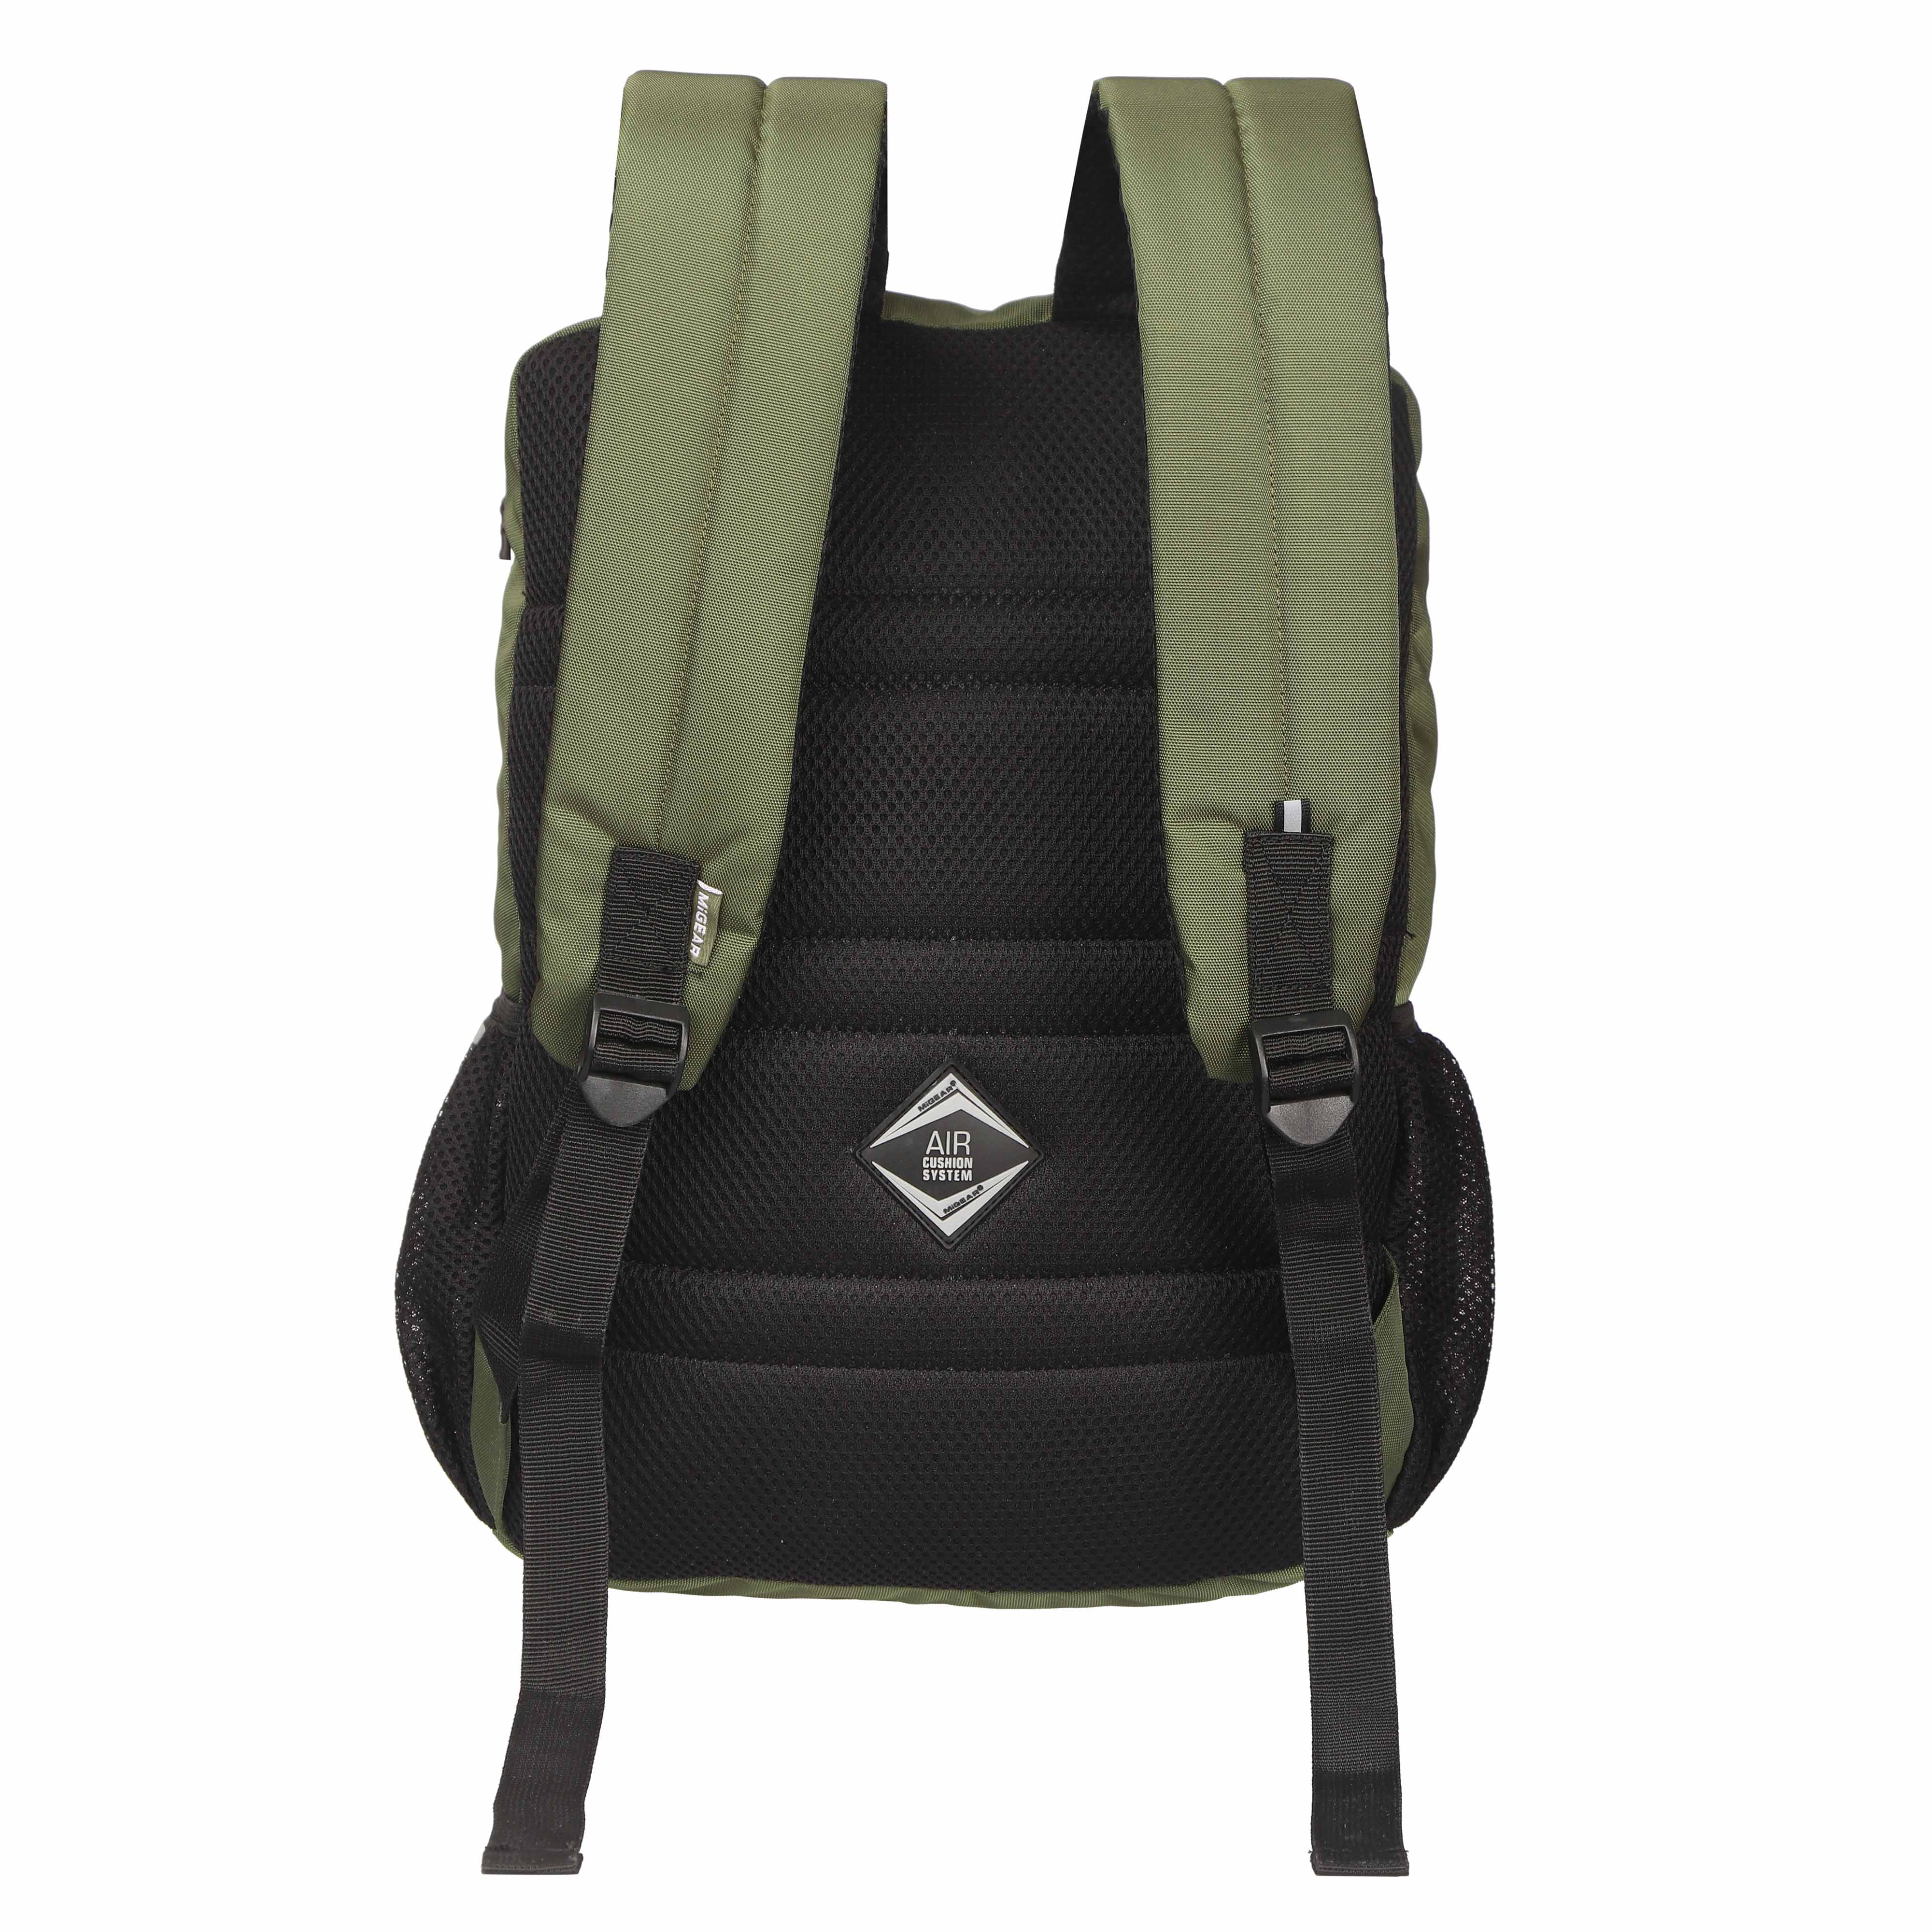 Olive The Calibre Backpack